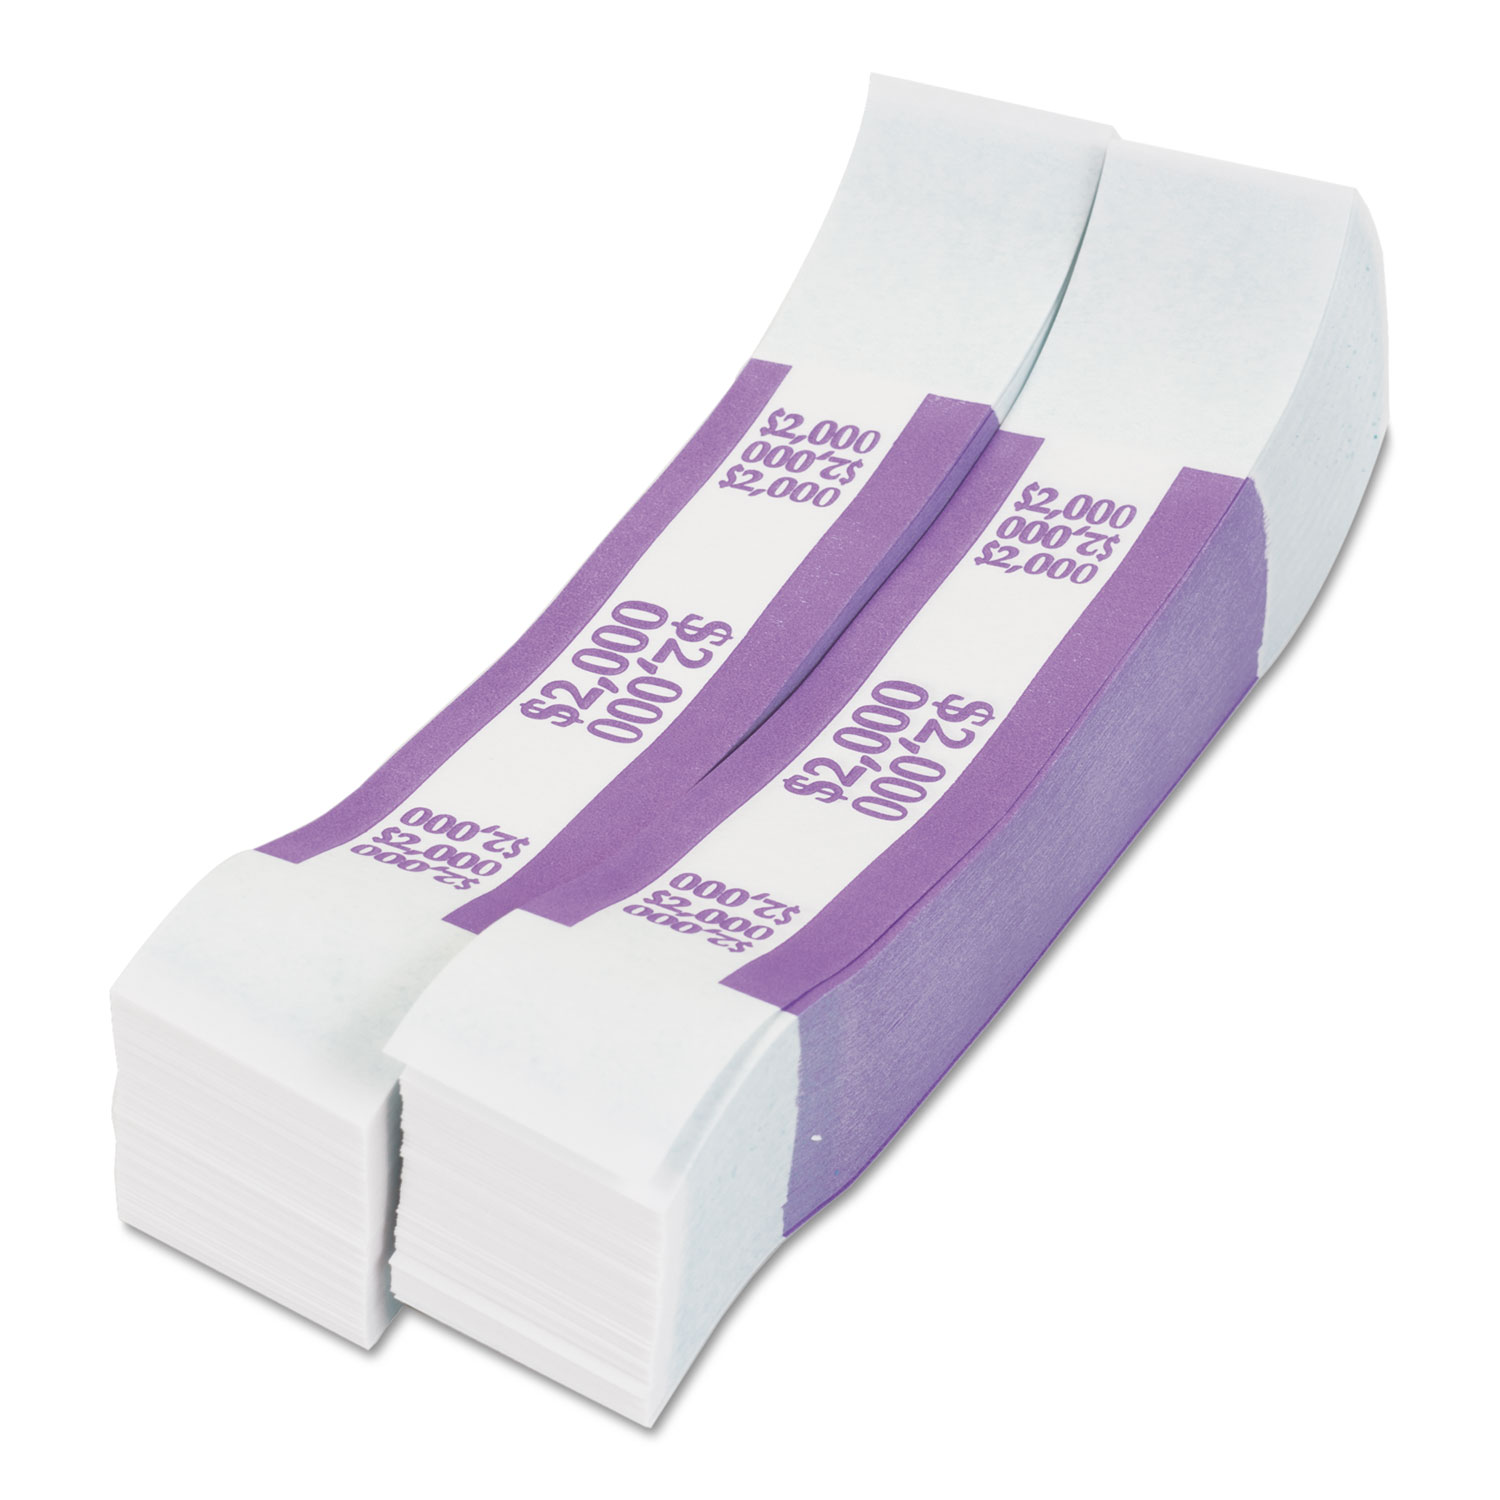 Coin-Tainer Currency Straps 2,000 in $20 Bills 1000 Bands/Pack Violet 